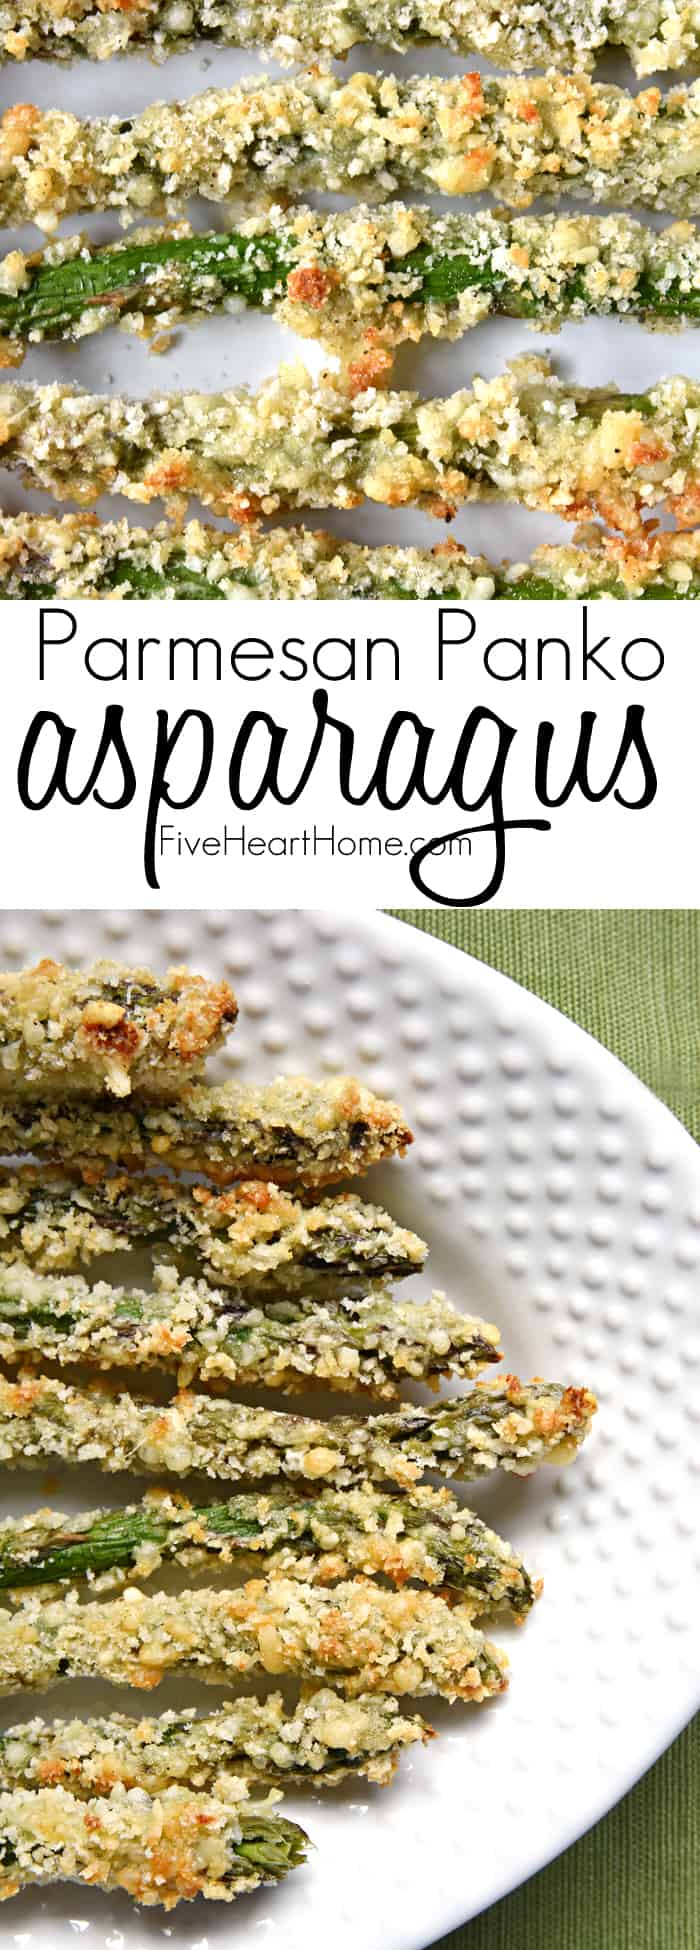 Asparagus Fries are Panko and Parmesan crusted asparagus spears that are breaded and baked until crispy and golden brown for an addictive, healthy side dish or snack! | FiveHeartHome.com via @fivehearthome